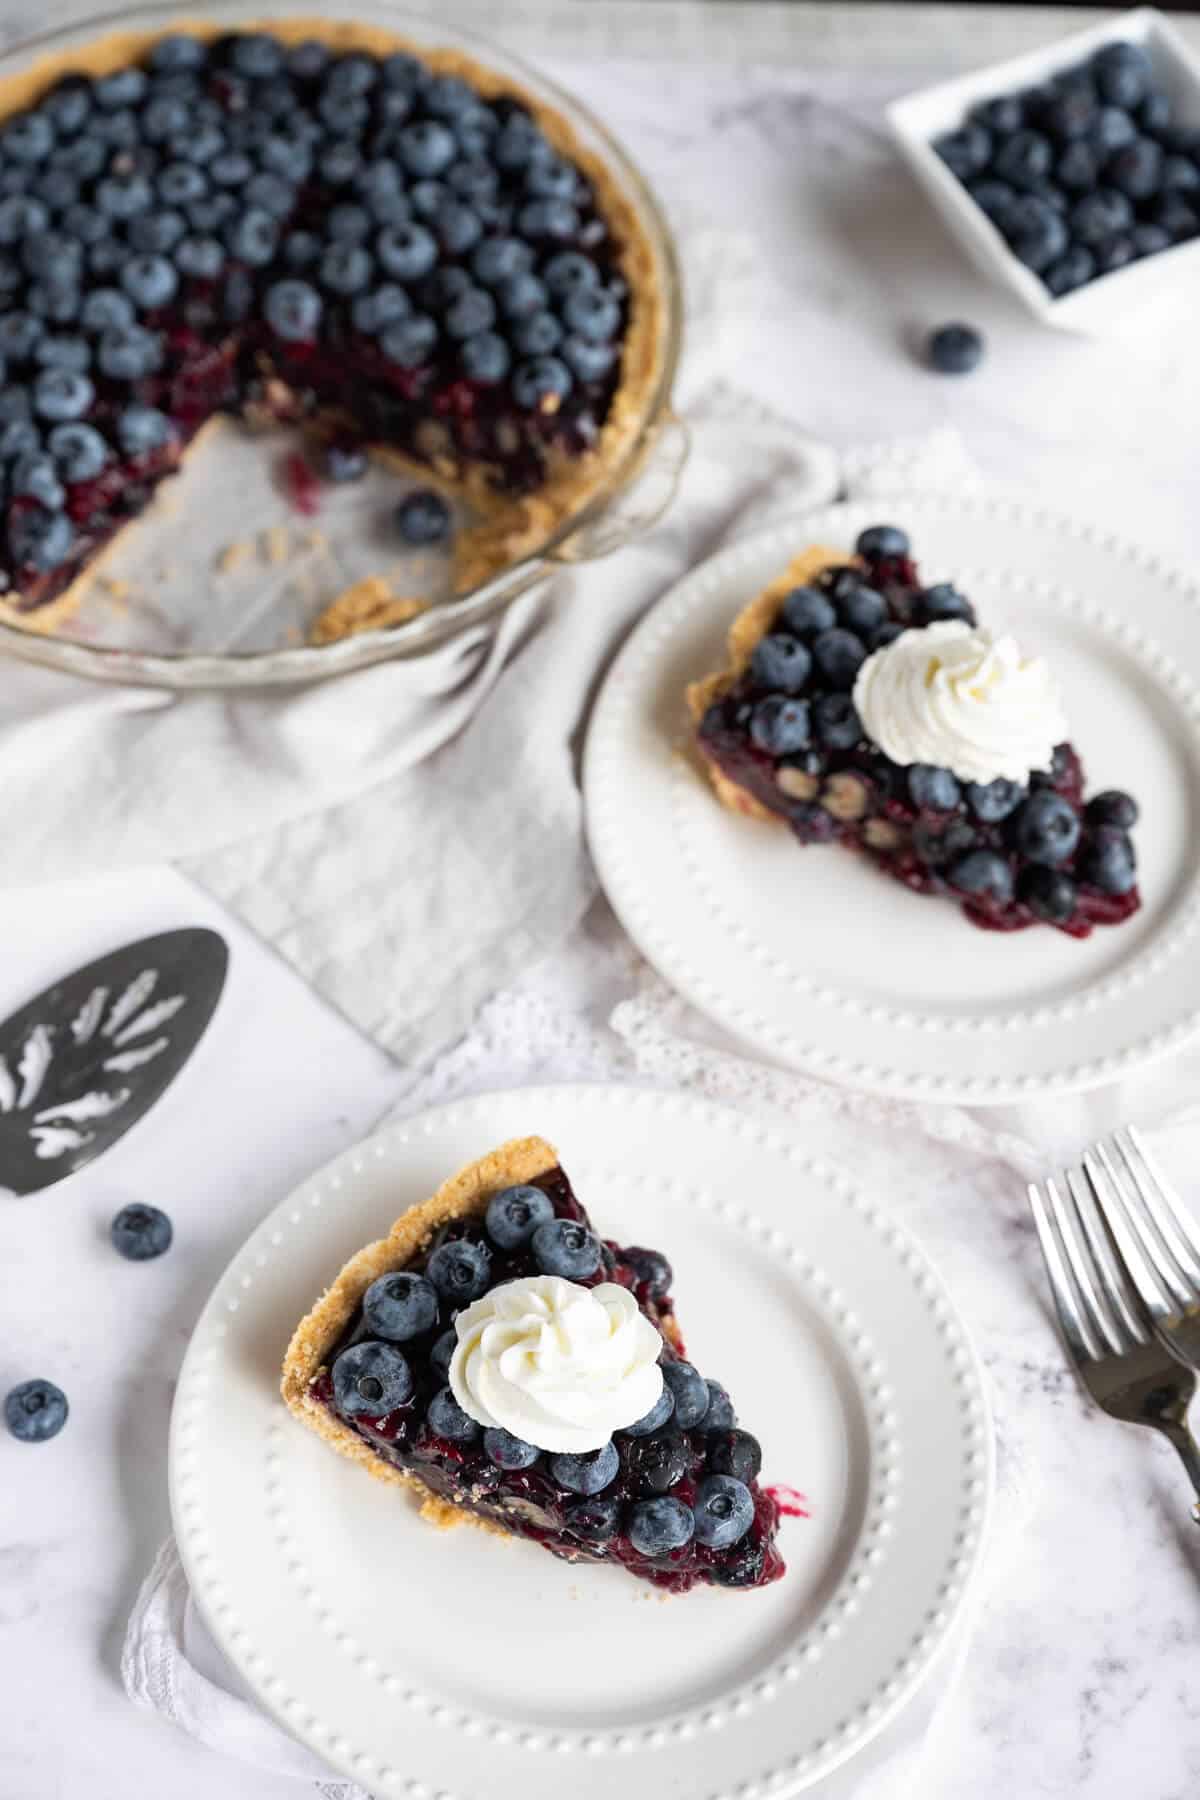 two slices of blueberry pie plated next to whole pie